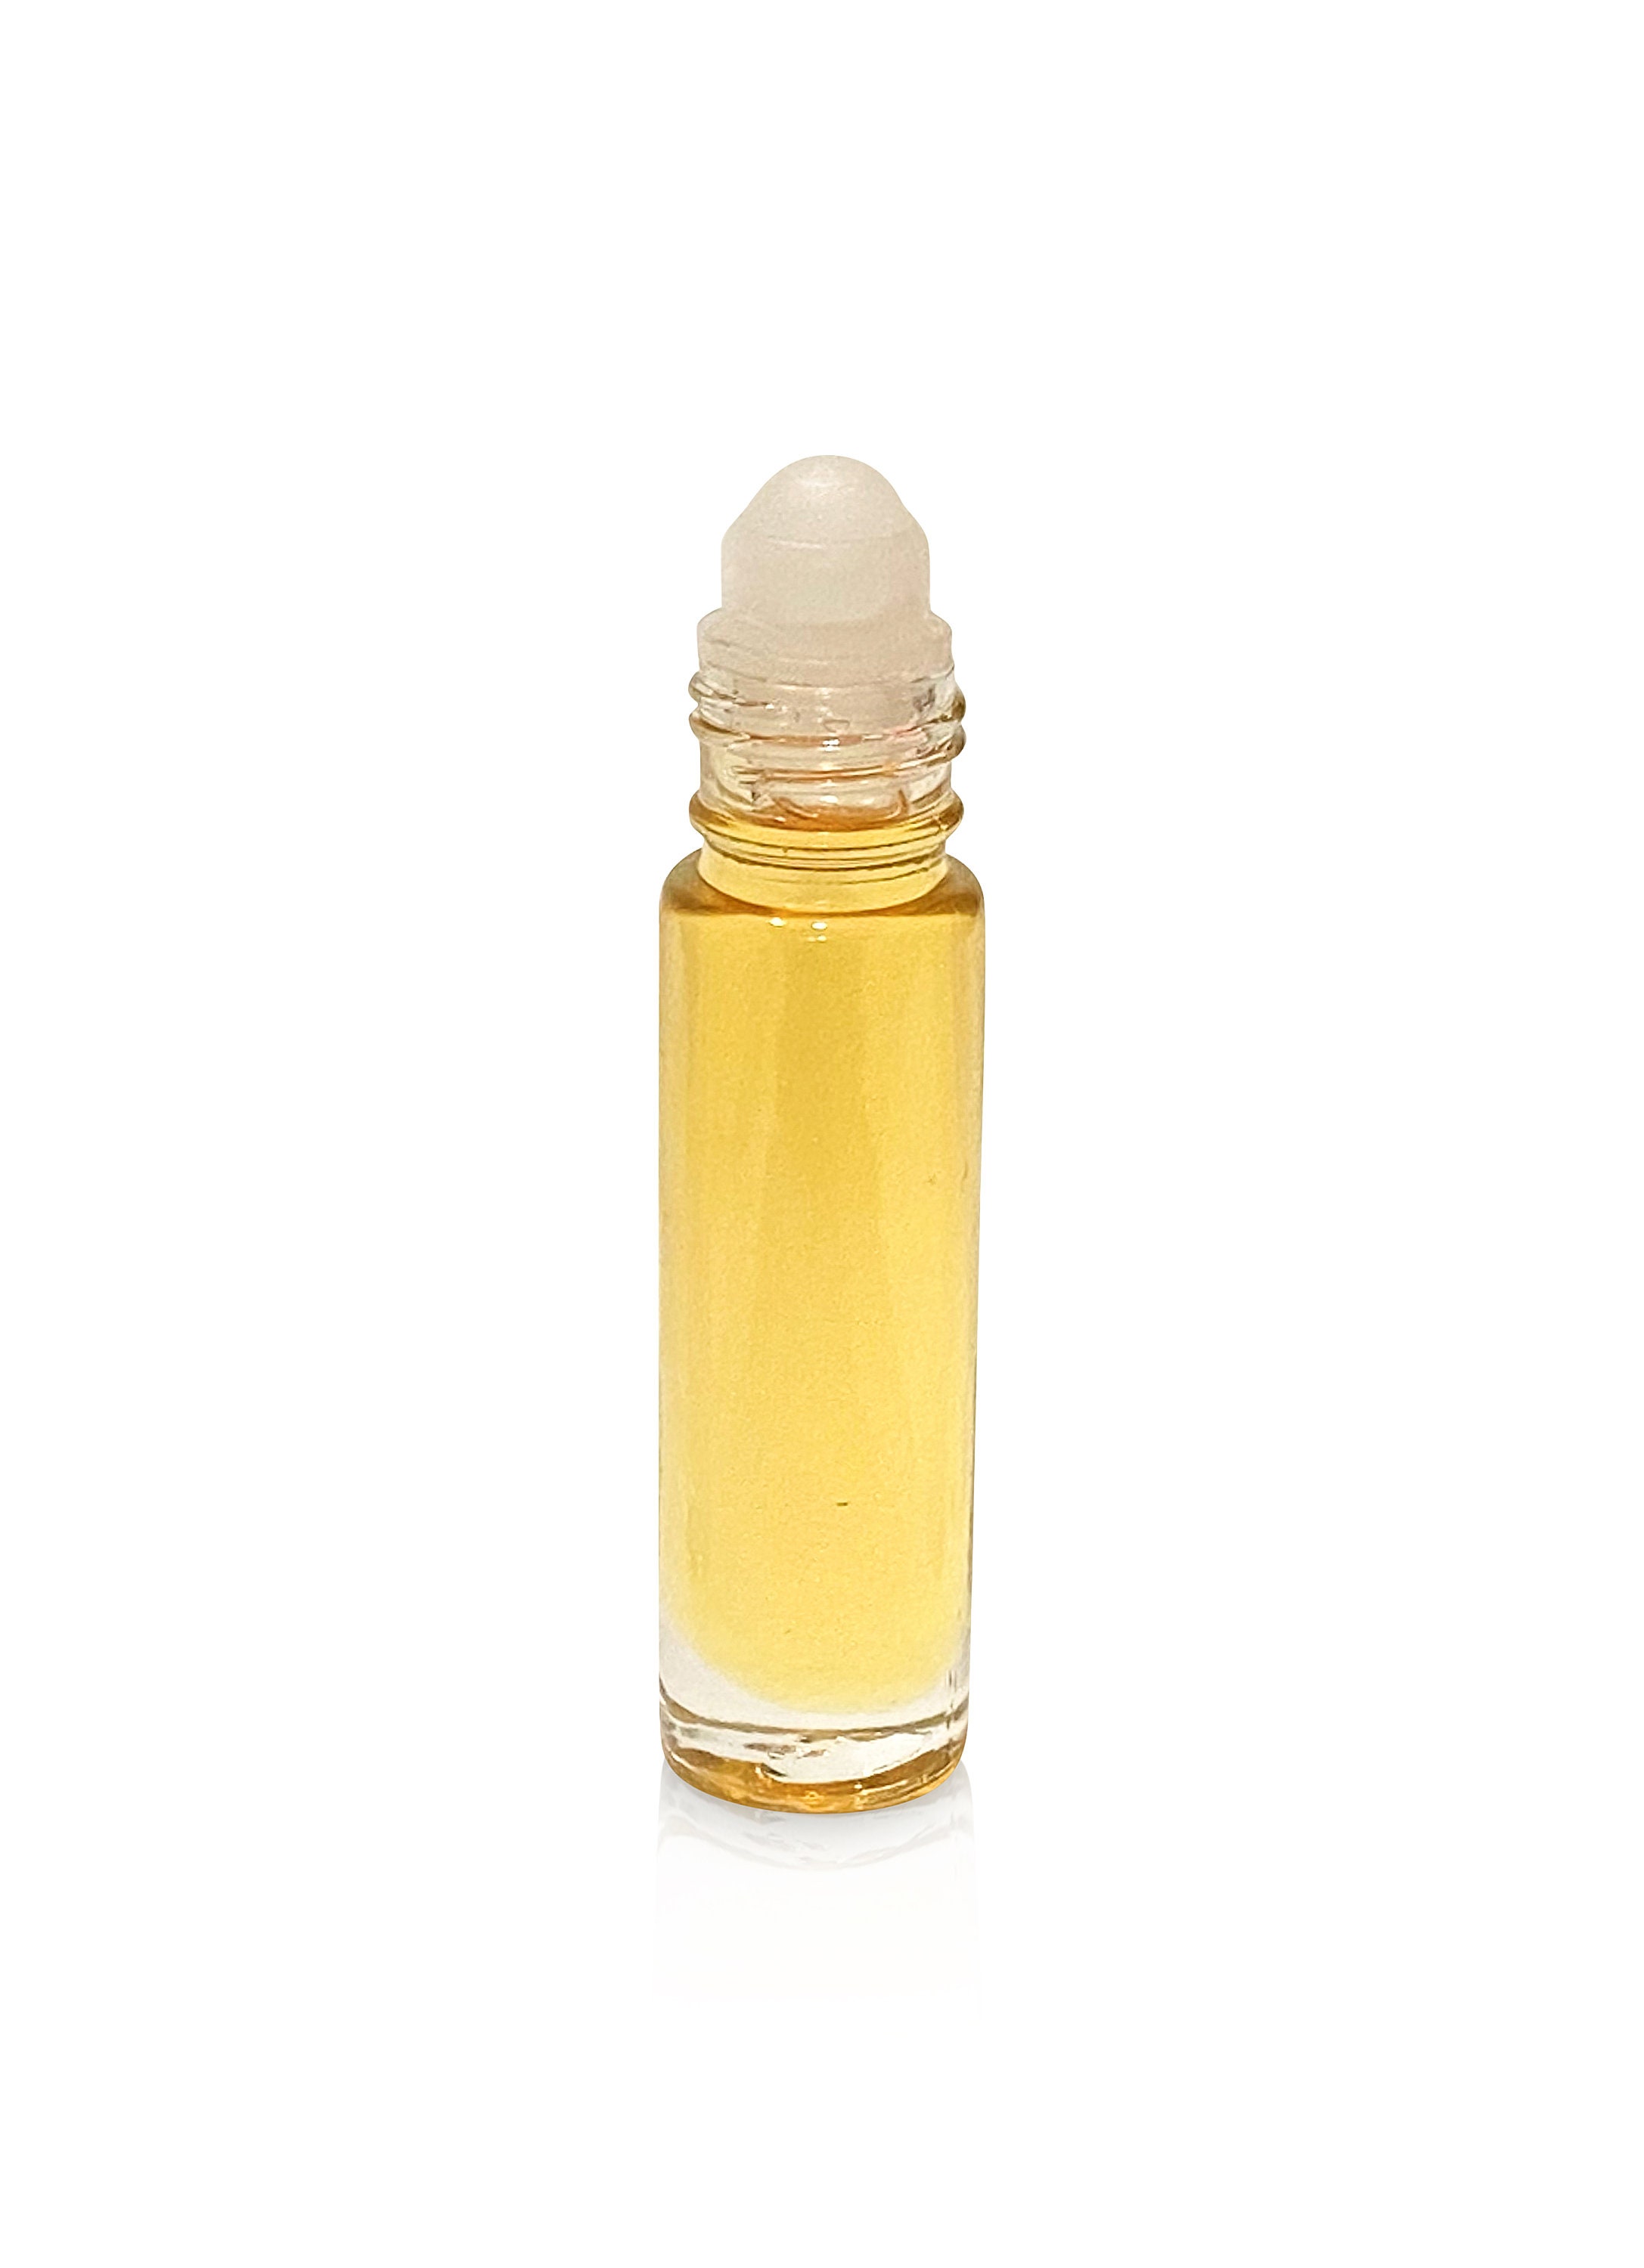  Concentrated Fragrance Oil - Scent - Vanilla Musk: an  Irresistible Blend of Creamy French Vanilla and White Musk Made w/Natural  Essential Oils. (.33 fl.oz.) : Arts, Crafts & Sewing